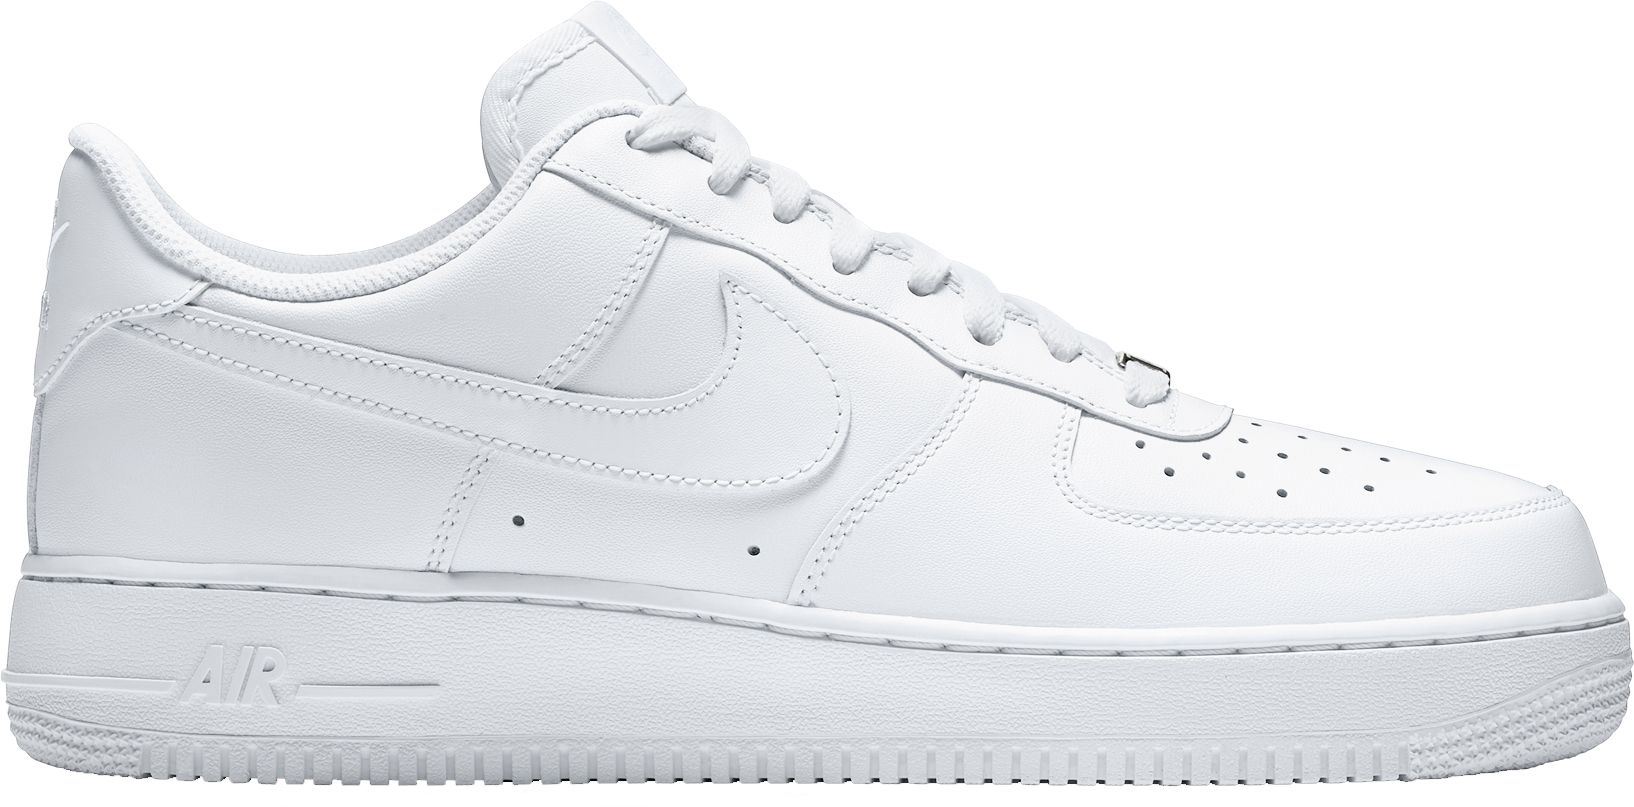 nike air force 1 shoes price